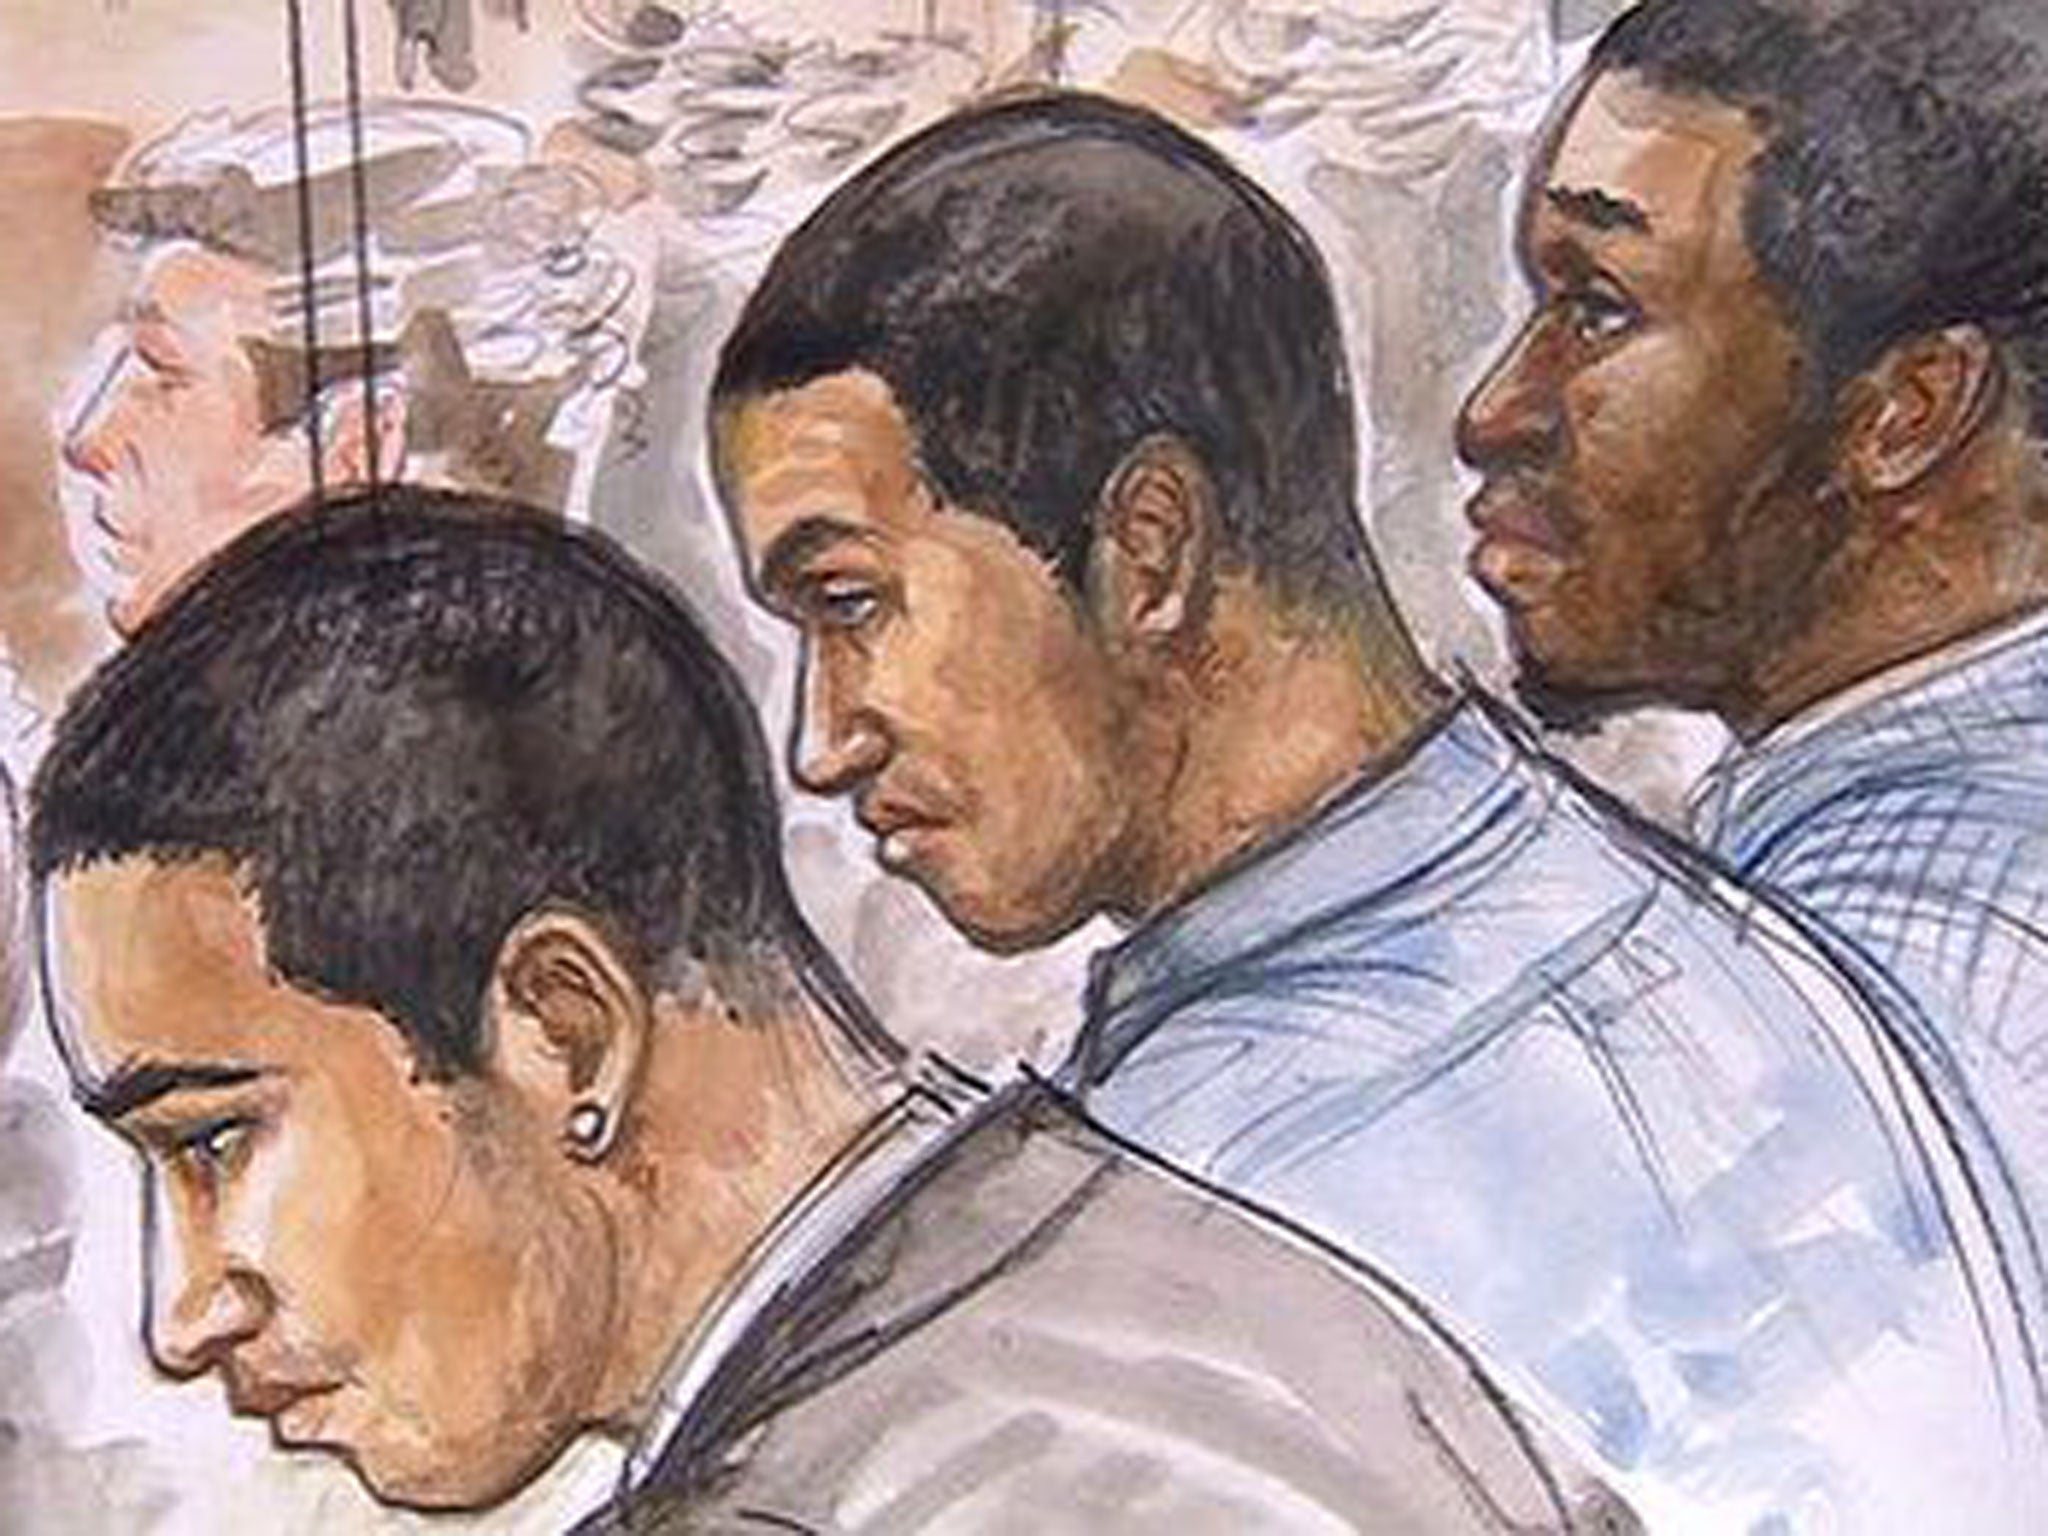 Cameron Cashin, centre, was convicted of killing Malakai McKenzie. His friend, Ijah Lavelle Moore, was cleared of all charges